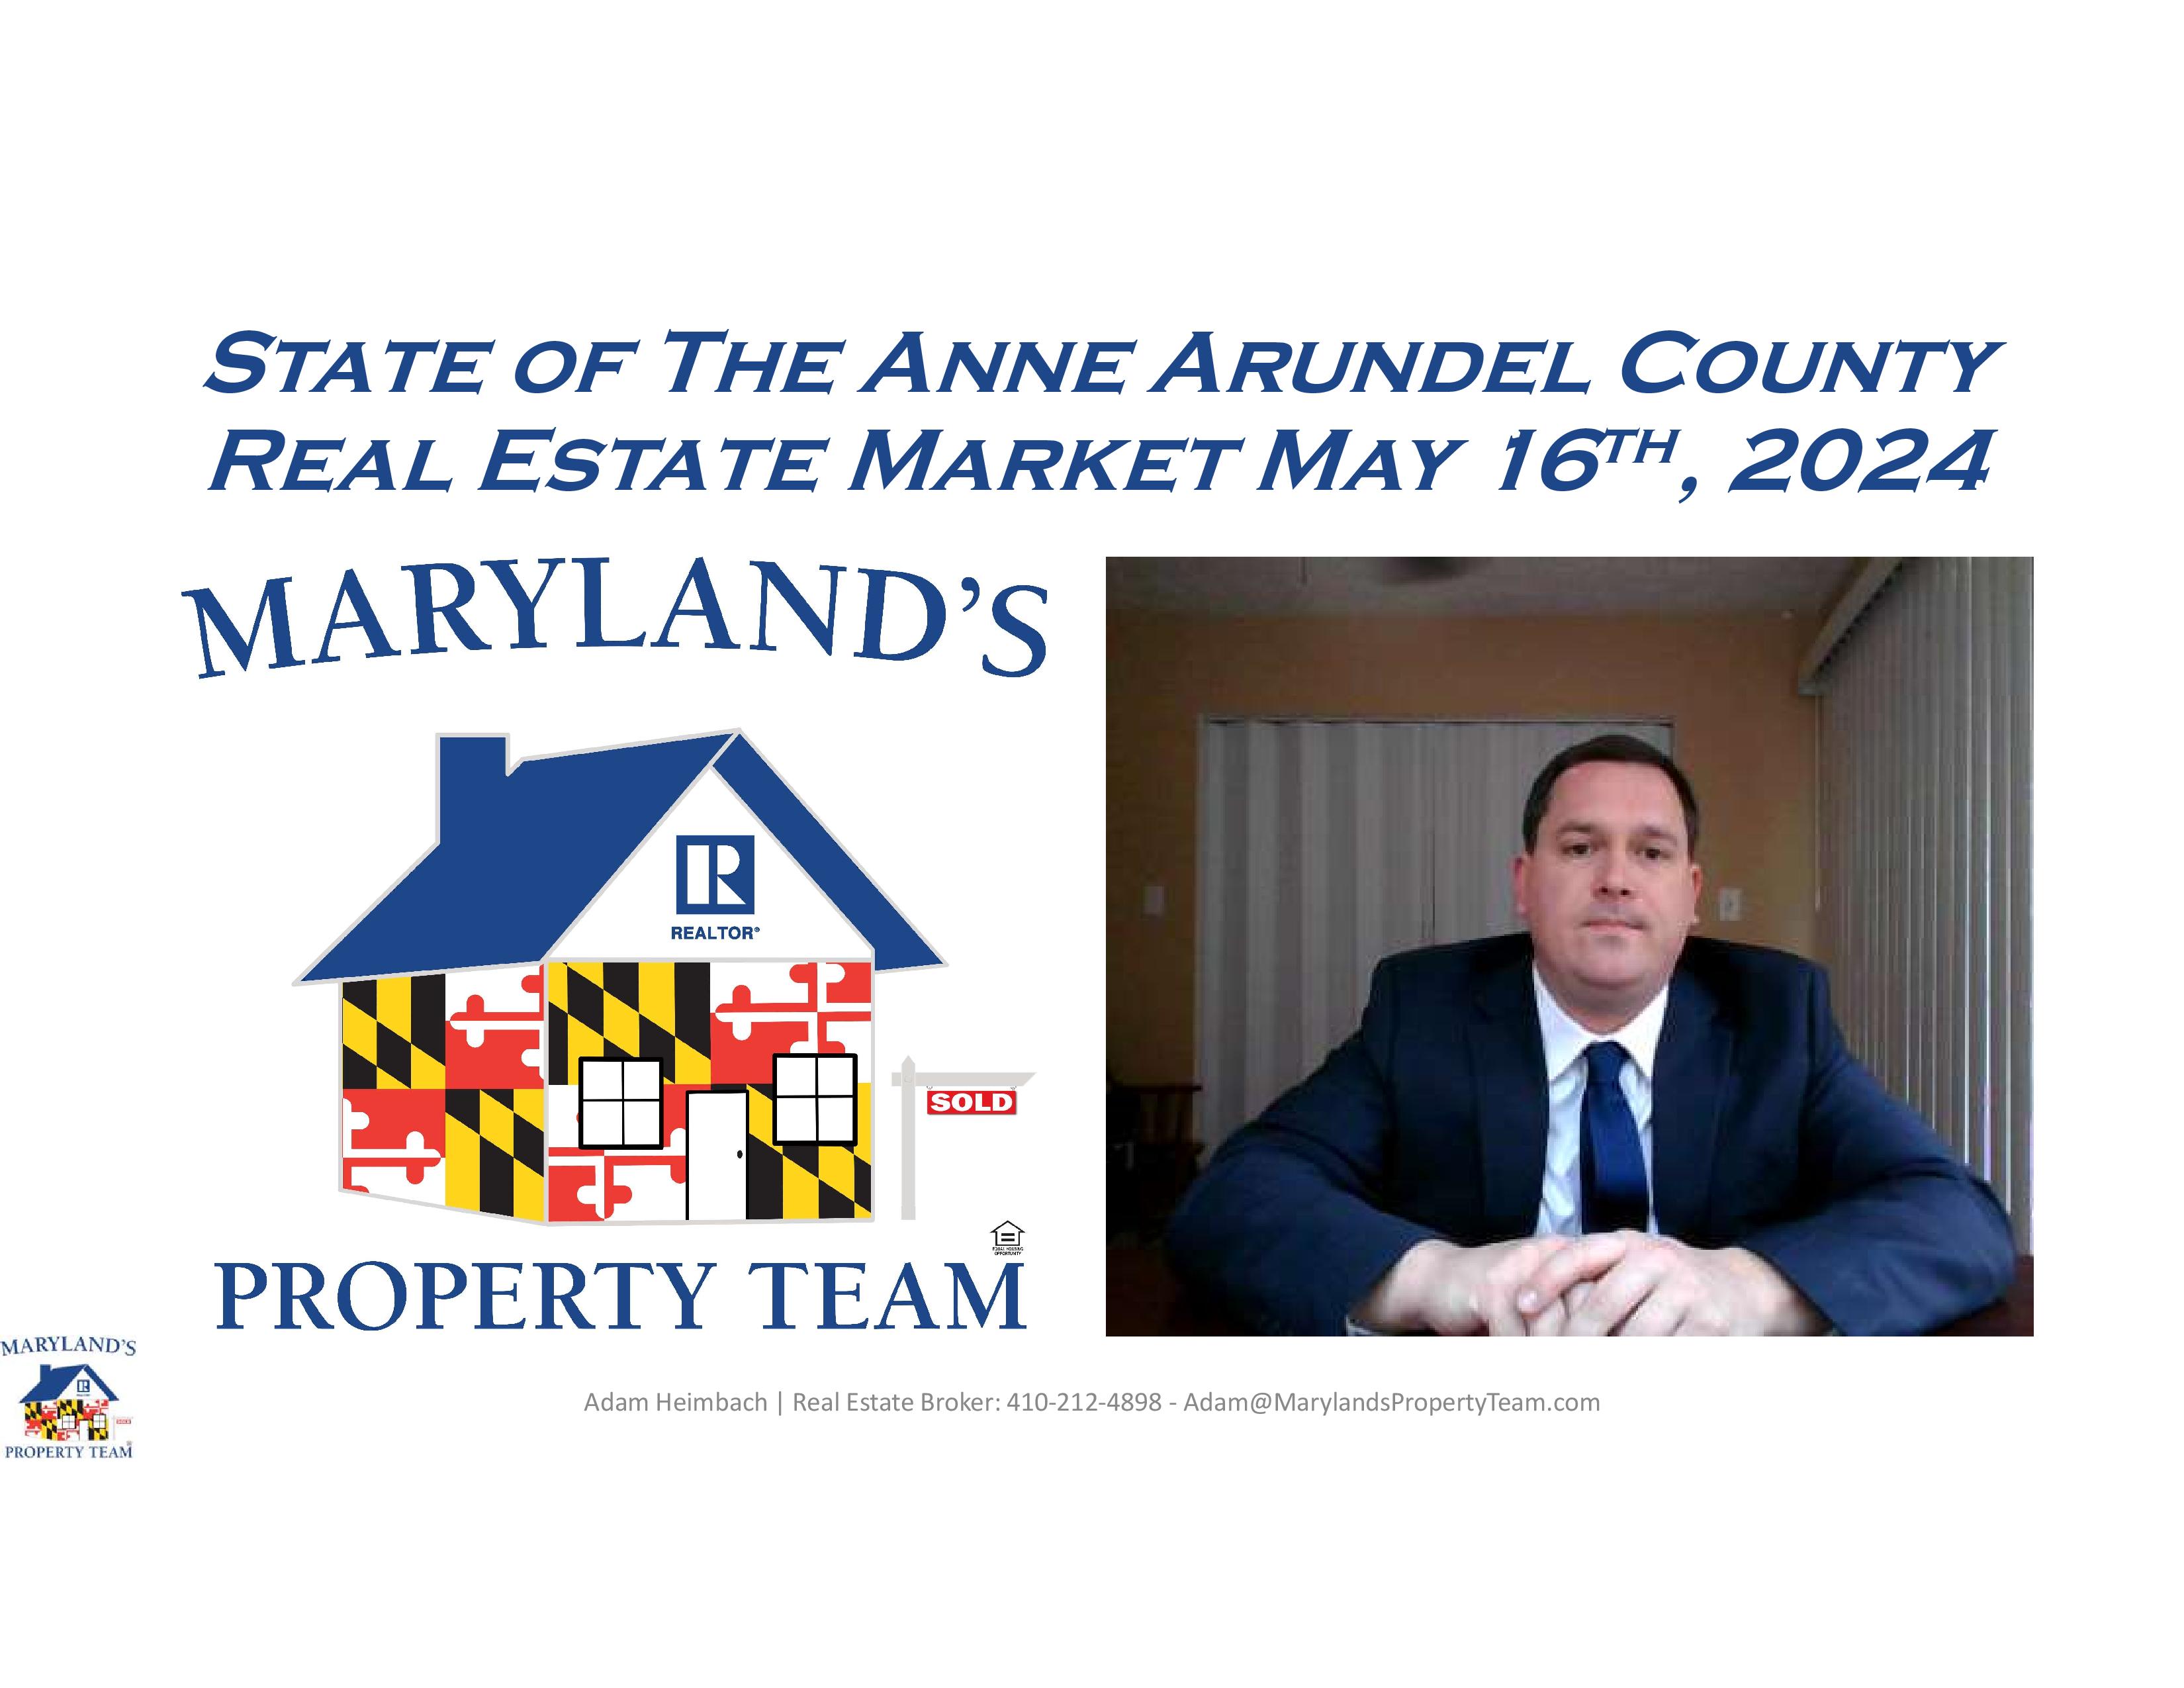 State of the Anne Arundel County Real Estate Market May 16th, 2024